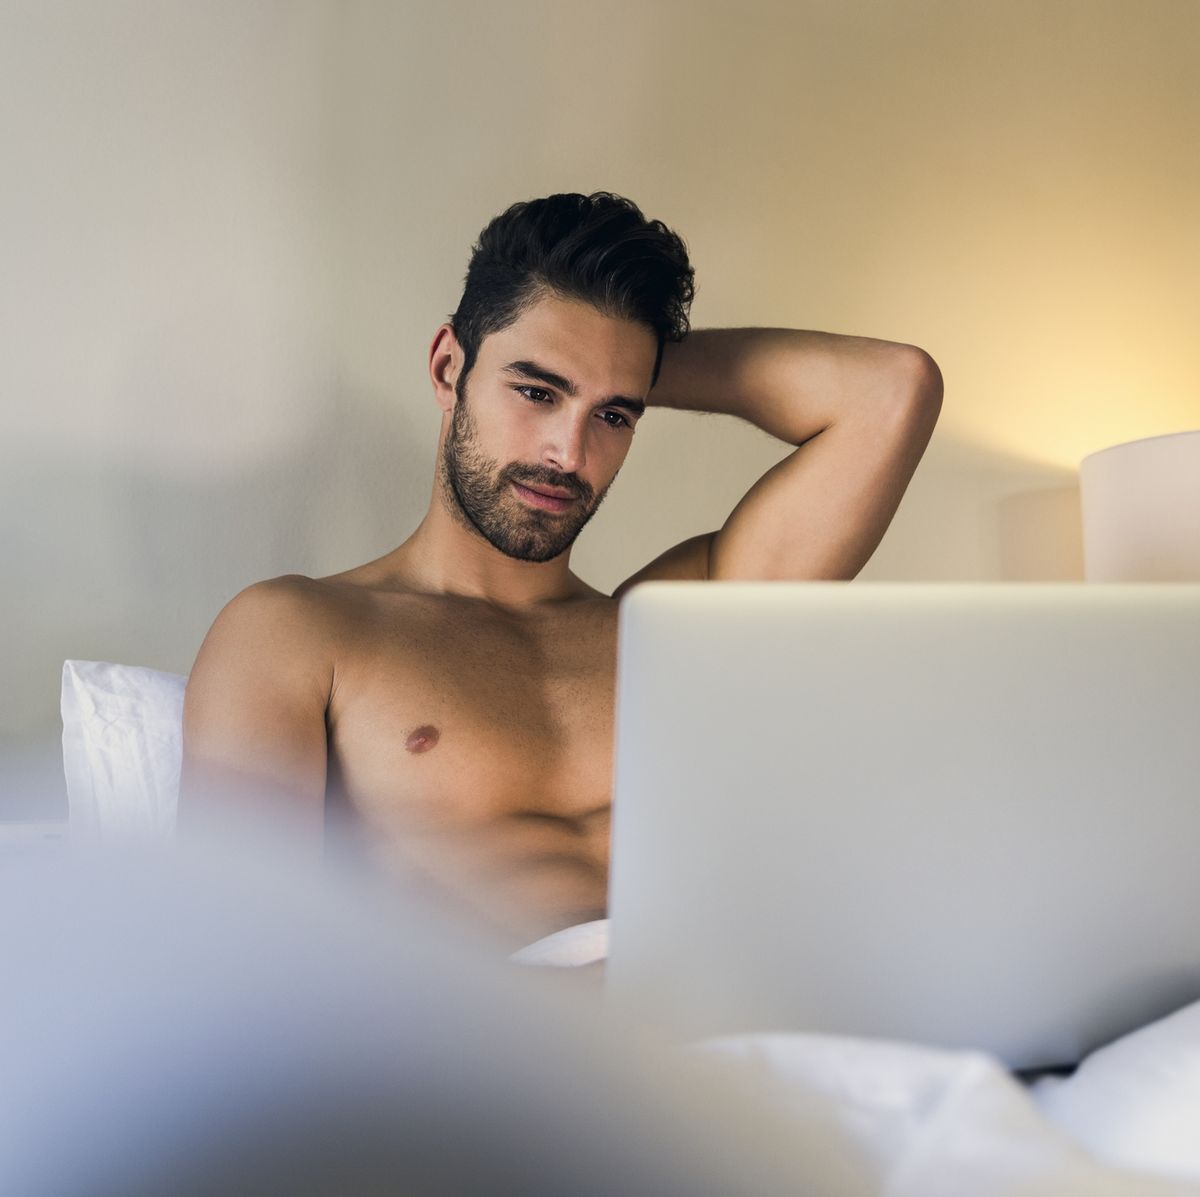 Free Sex Google - How to Browse Porn Sites Safely Without Getting Hacked